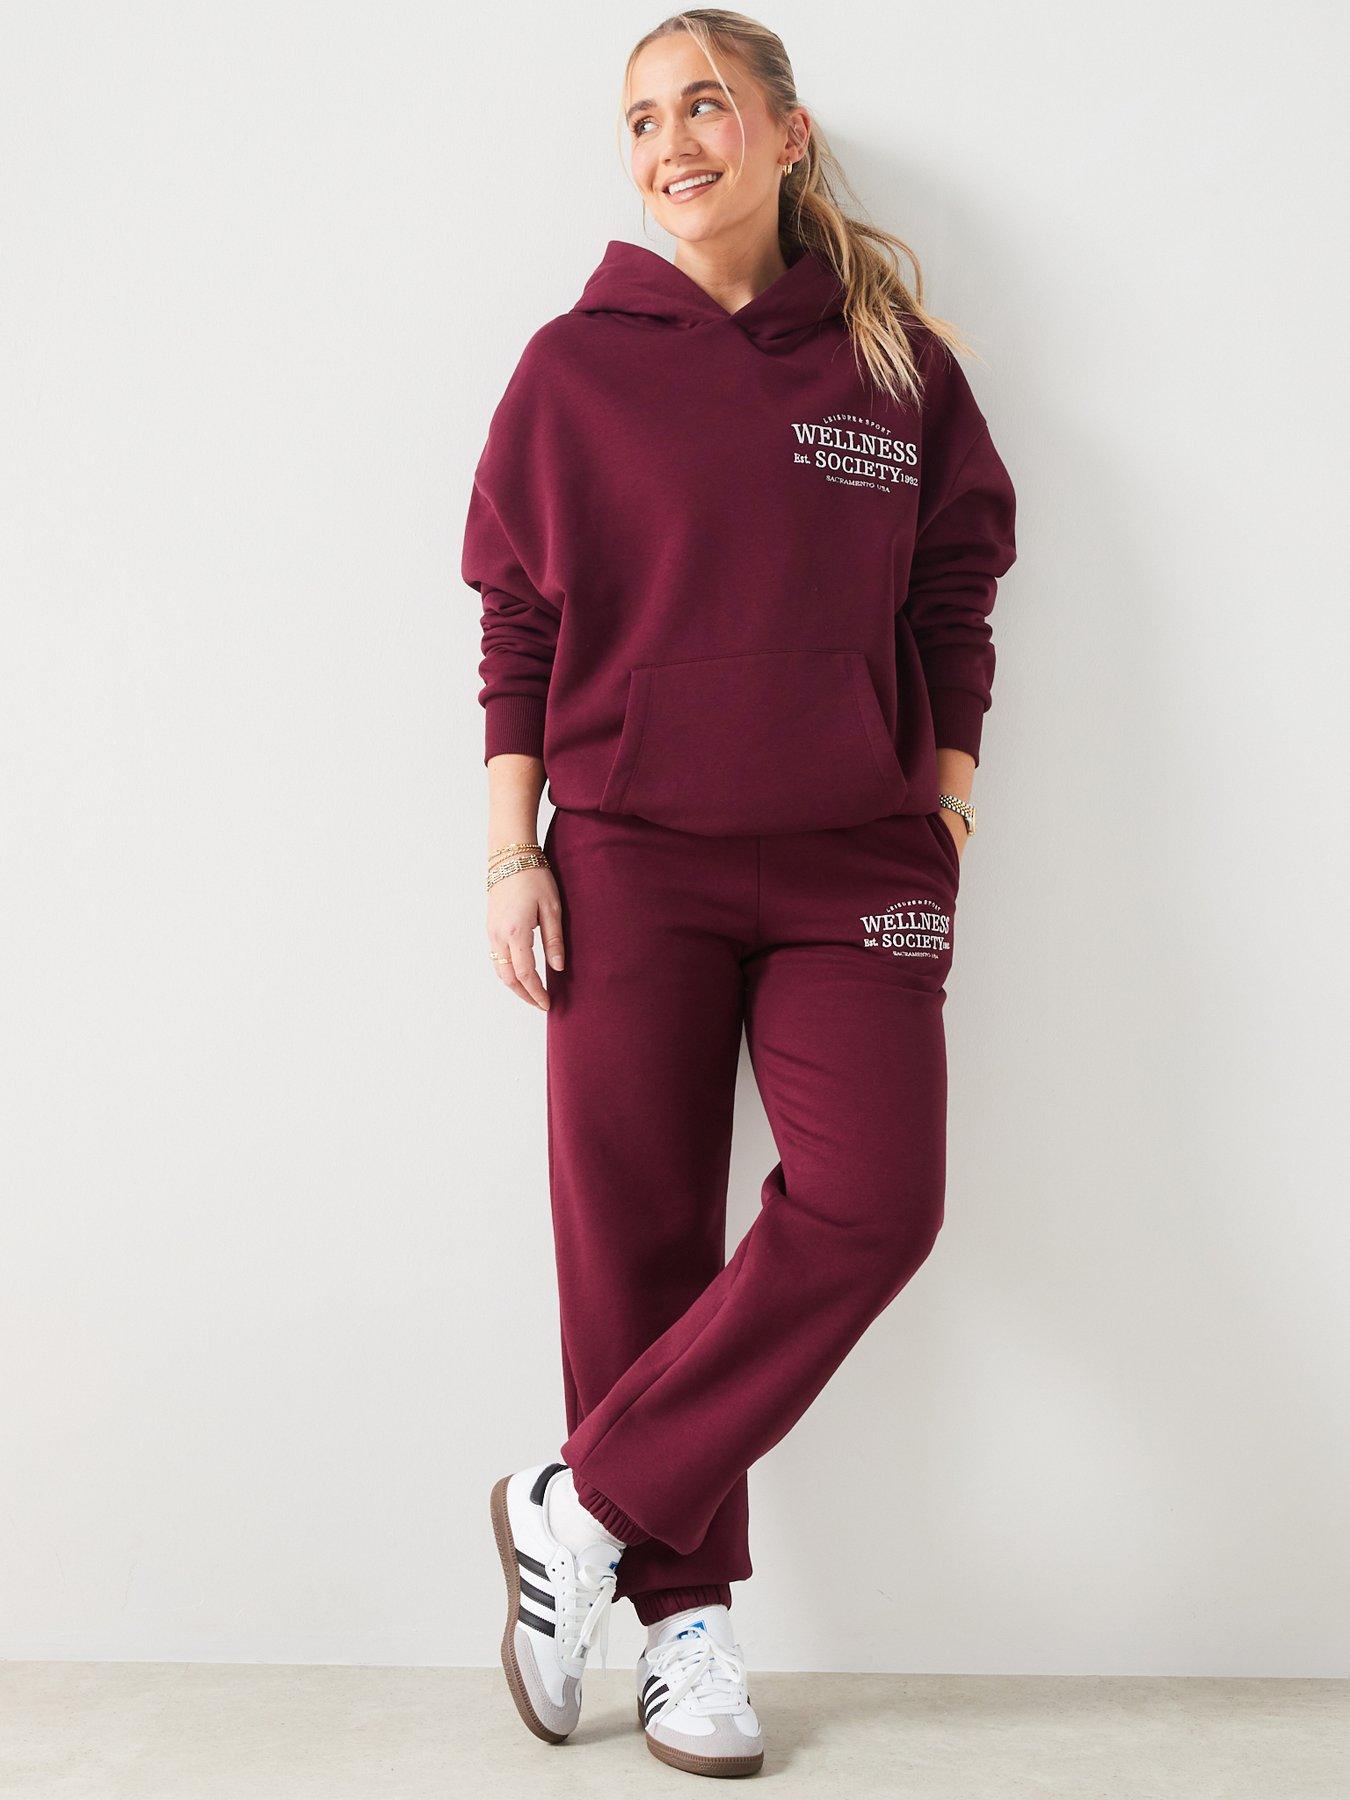 Shop Calvin Klein Unisex Street Style Co-ord Matching Sets Sweats